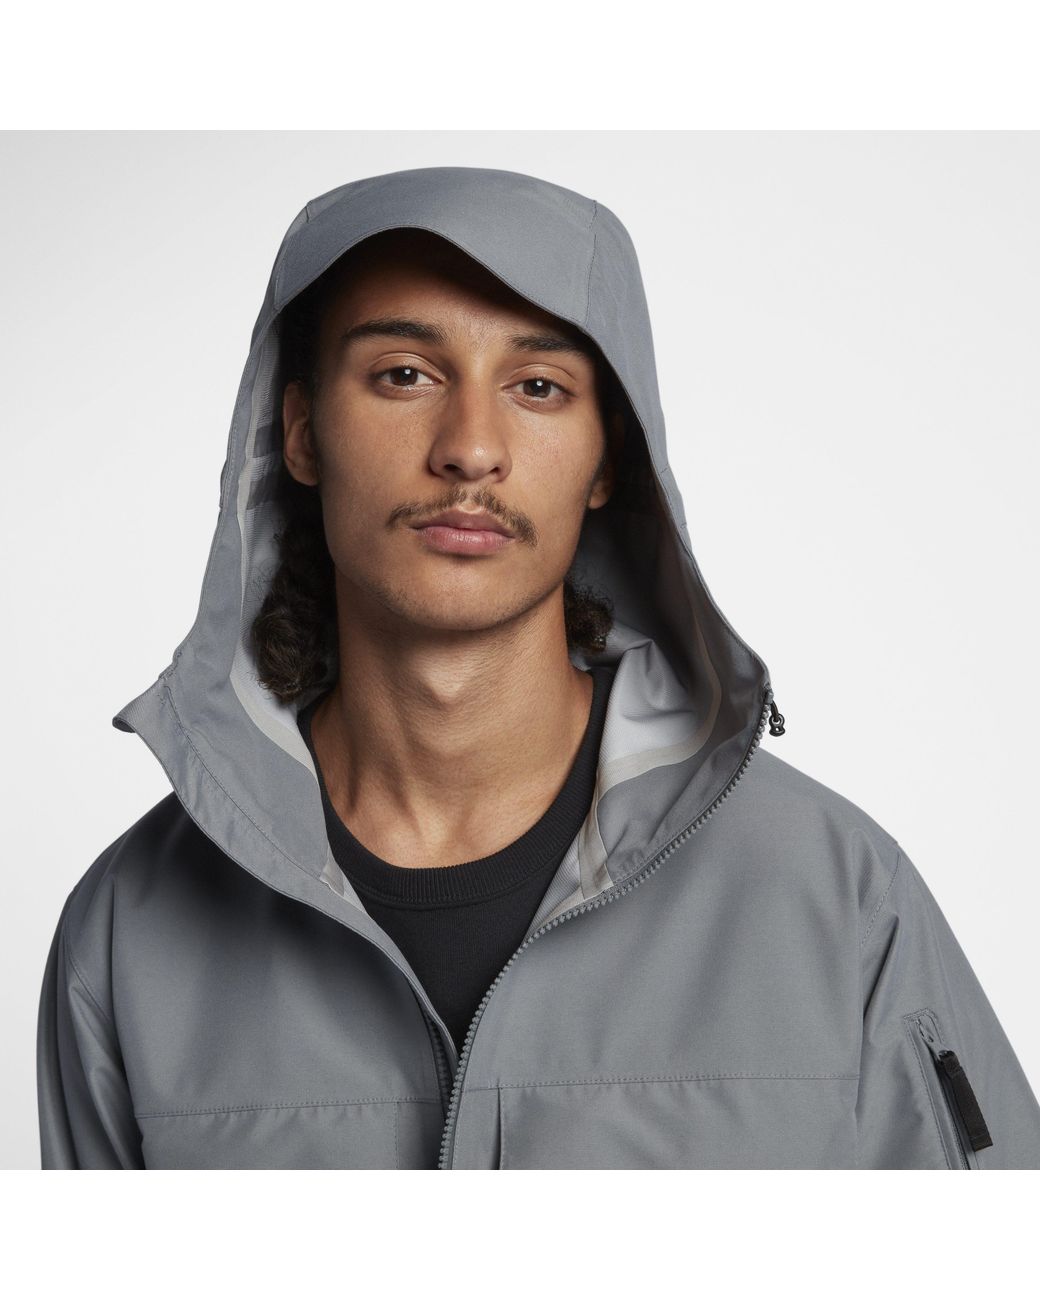 Nike Lab Collection Wet Reveal Jacket in Grey for Men | Lyst UK